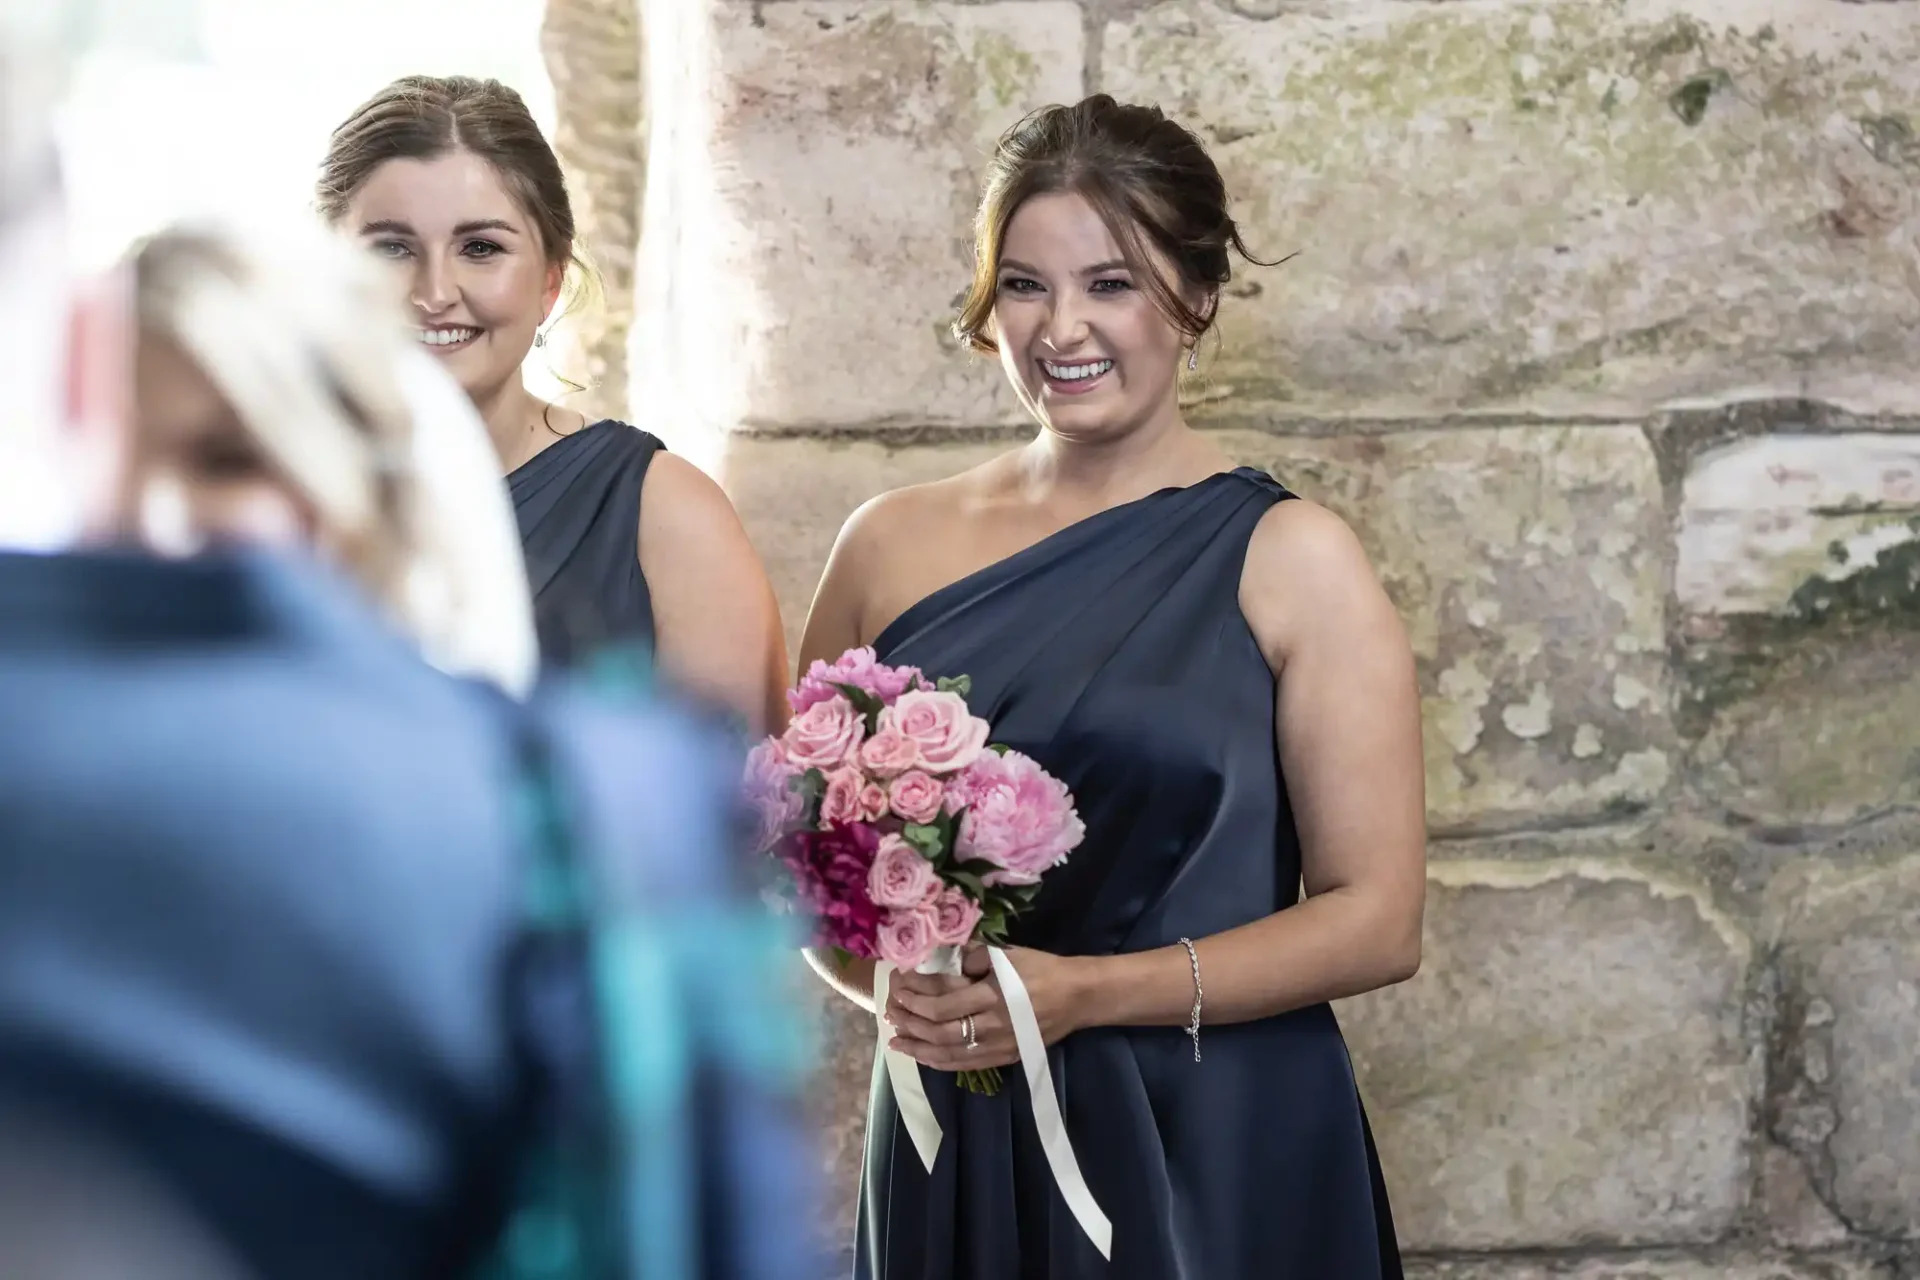 Two women in navy blue dresses smiling at a wedding, one holding a bouquet of pink roses.